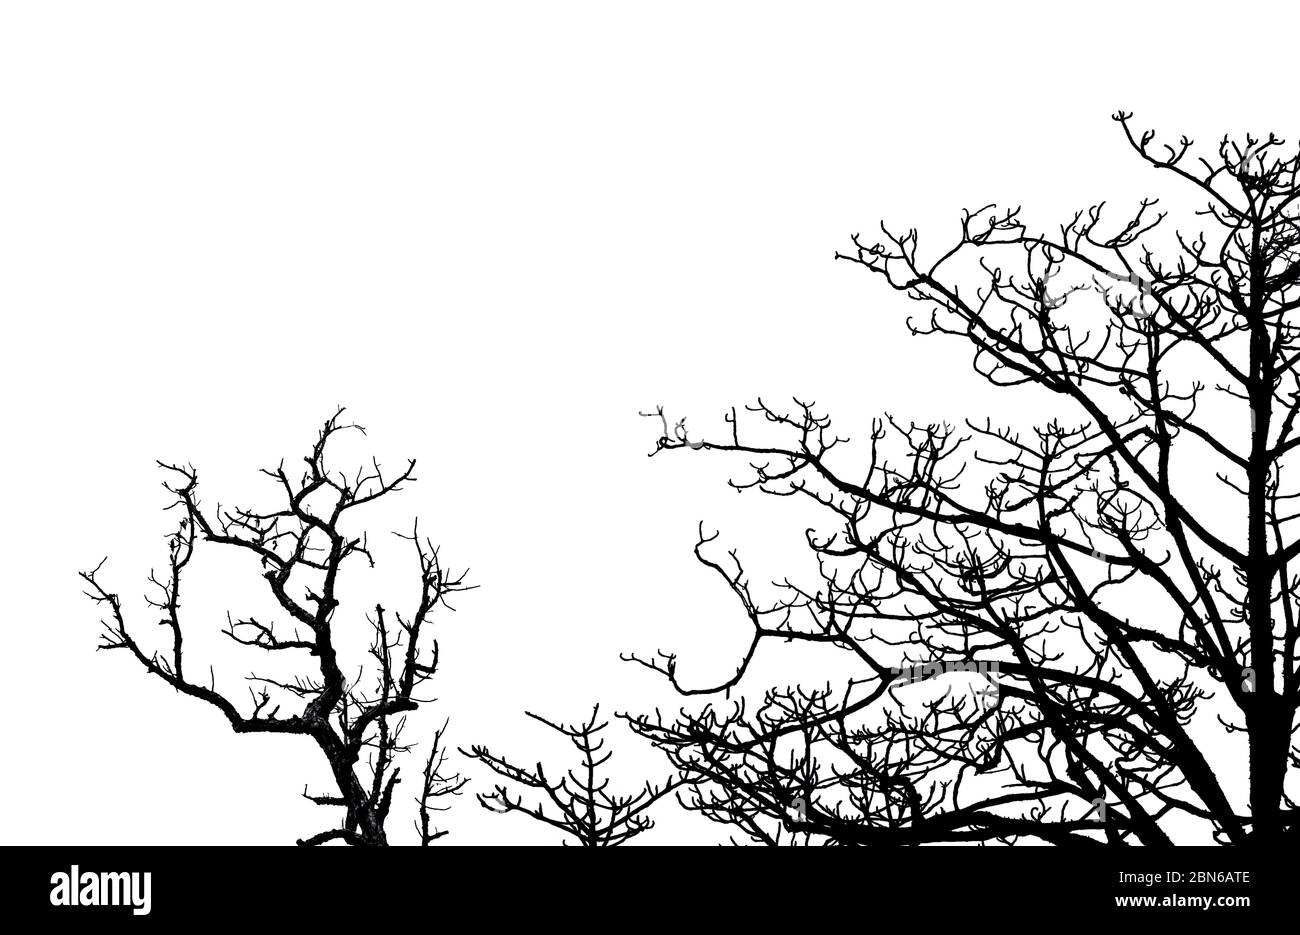 Silhouette Dead Tree And Branches Isolated On White Background Tree Branch For Graphic Design And Decoration Art On Black And White Scene Stock Photo Alamy